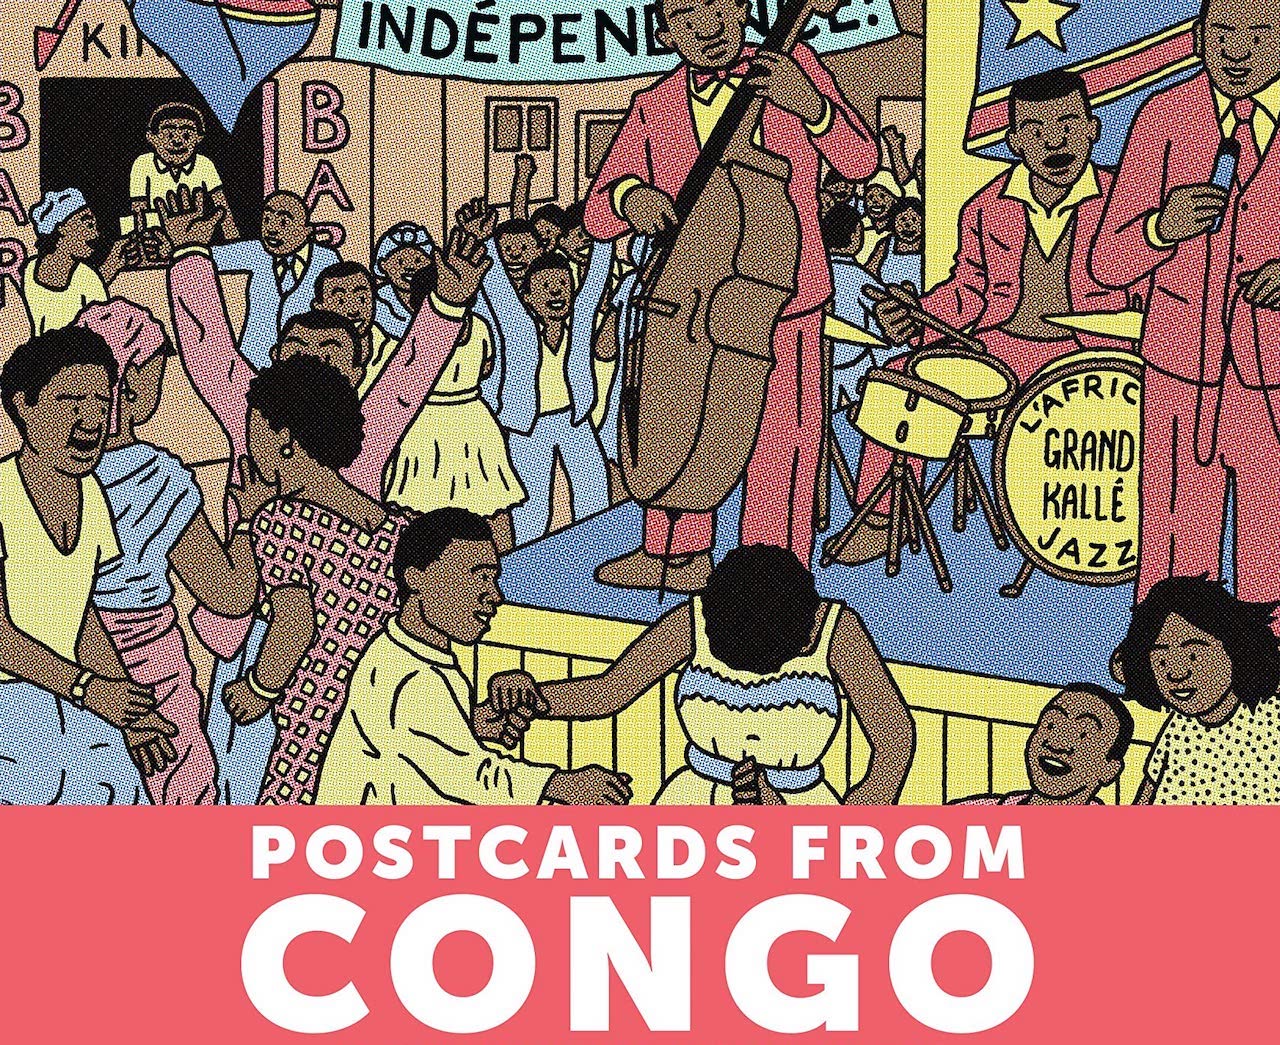 EXCLUSIVE Arsenal Pulp Press Preview: Postcards from Congo